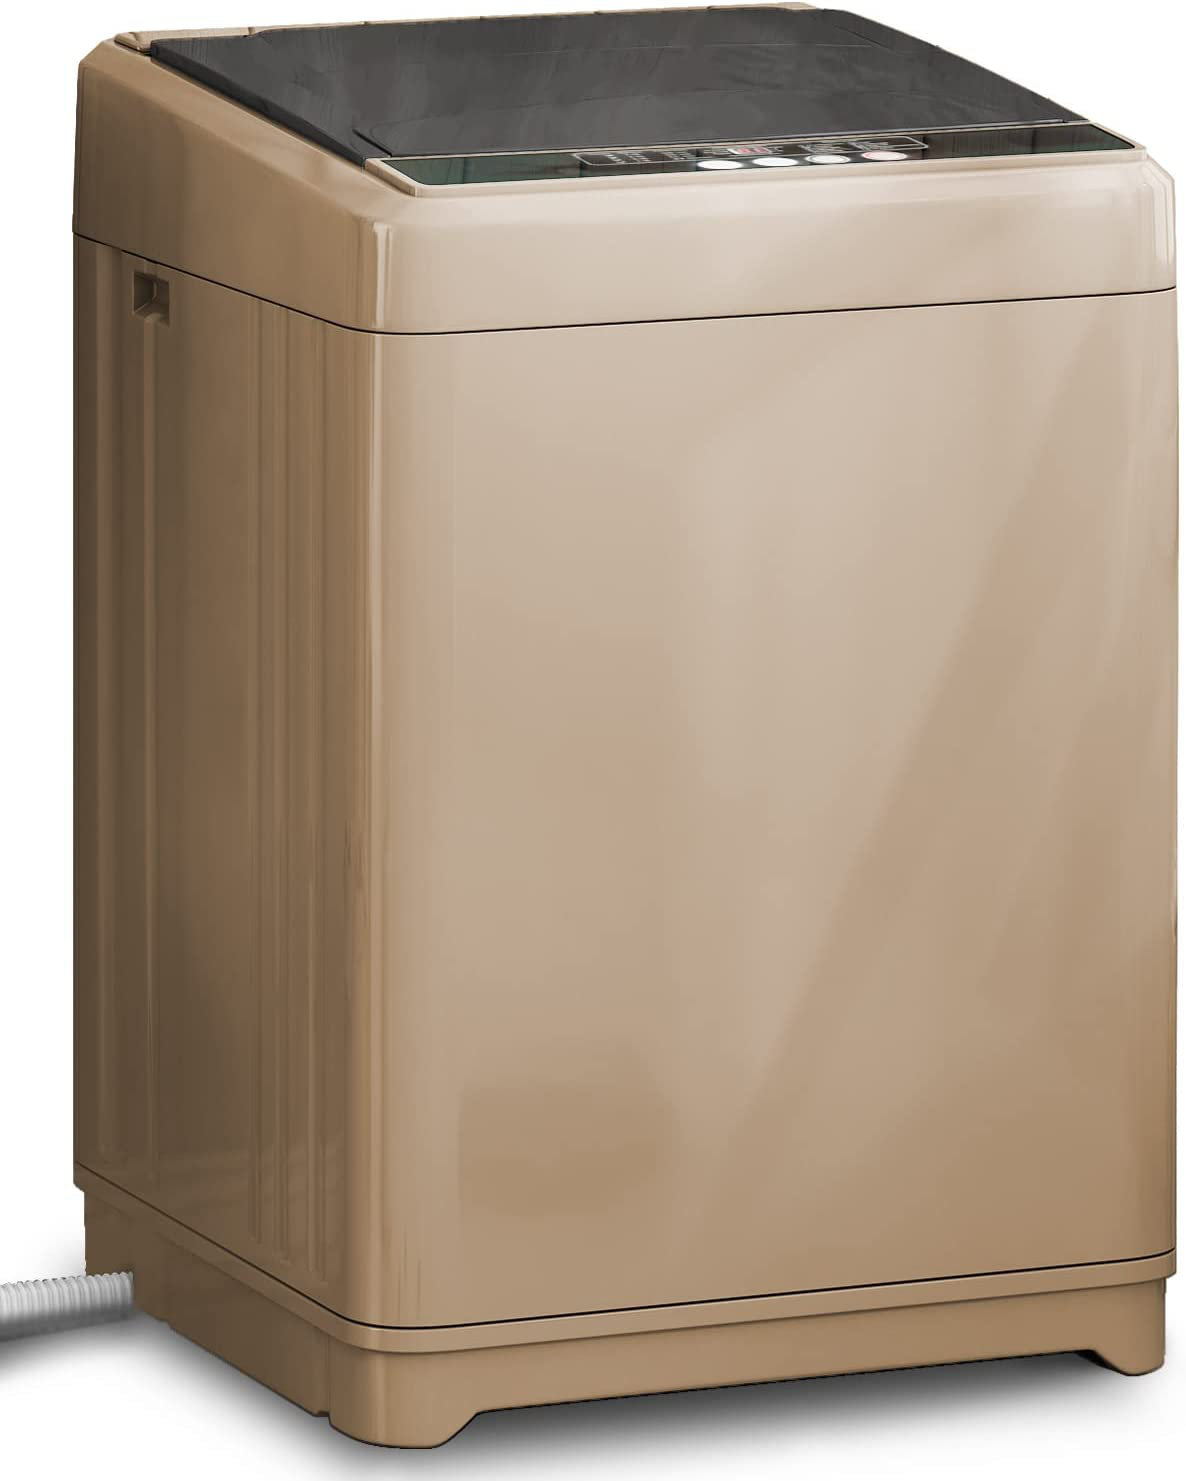 DreamDwell Home 2.4 cu. ft. Automatic Portable Washer Machine w/ Drain Pump  10 Programs 8 Water Levels Selections